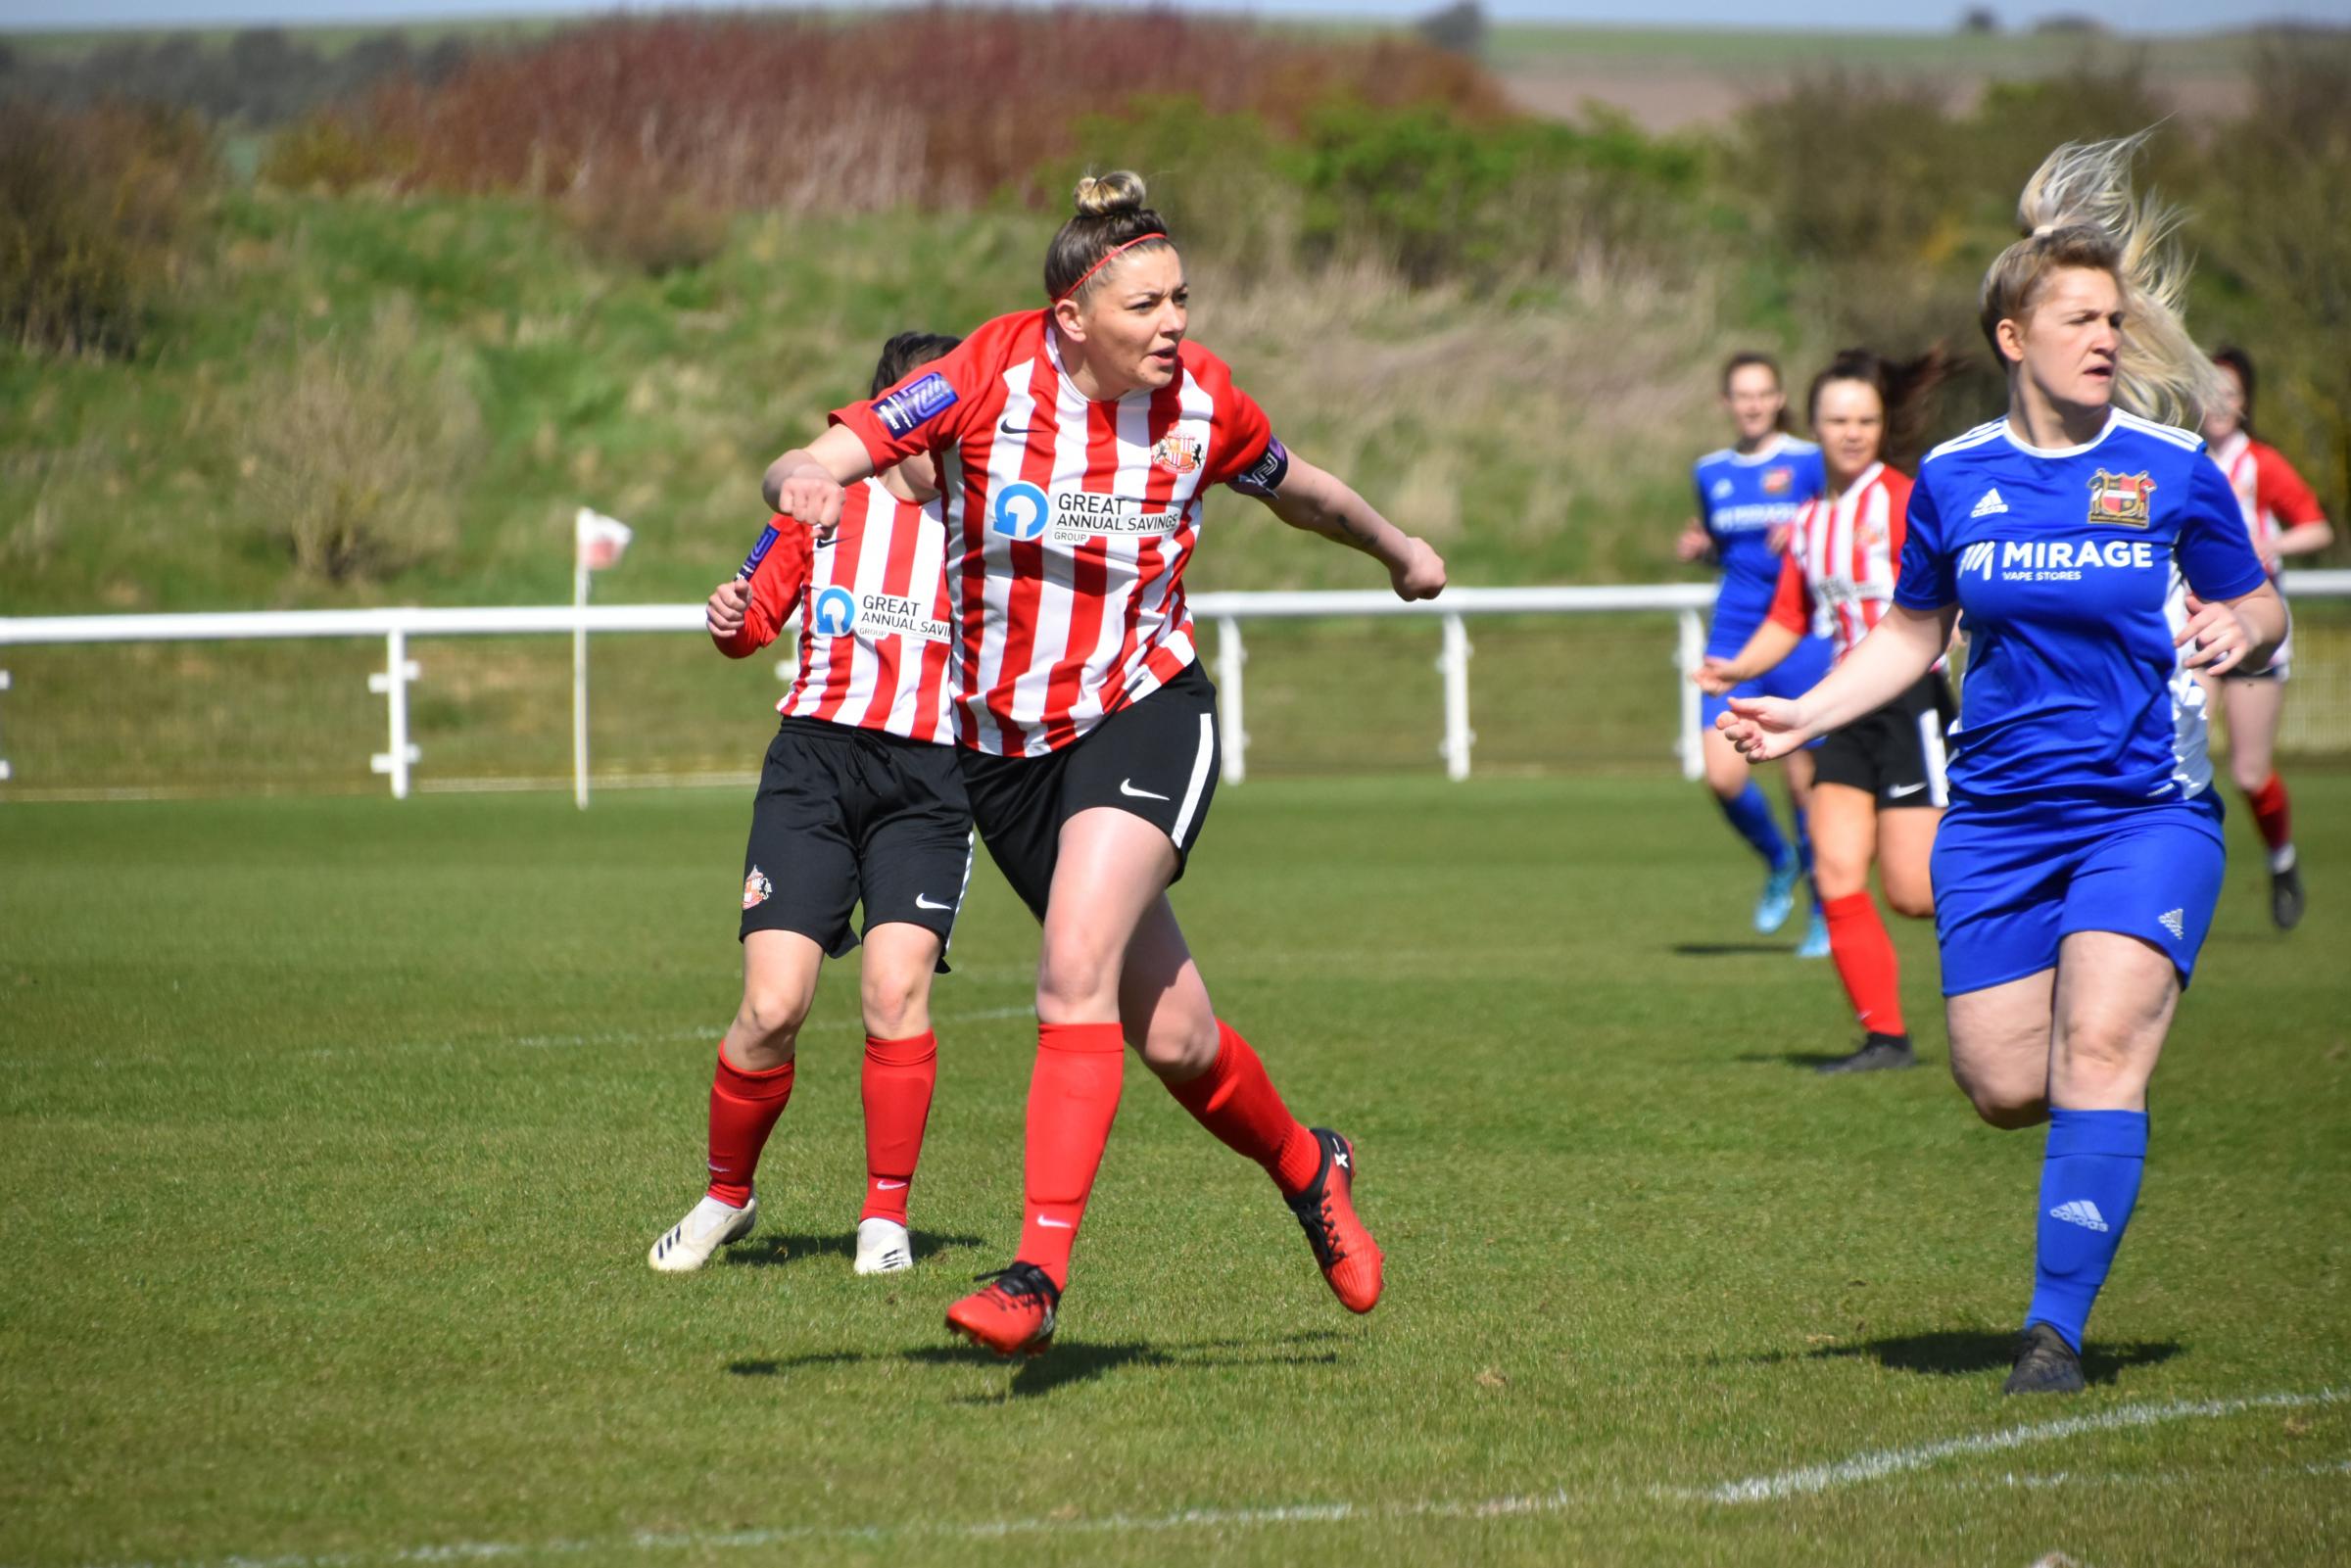 Kiera Ramshaw and Maria Farrugua sign new deals with Sunderland Ladies